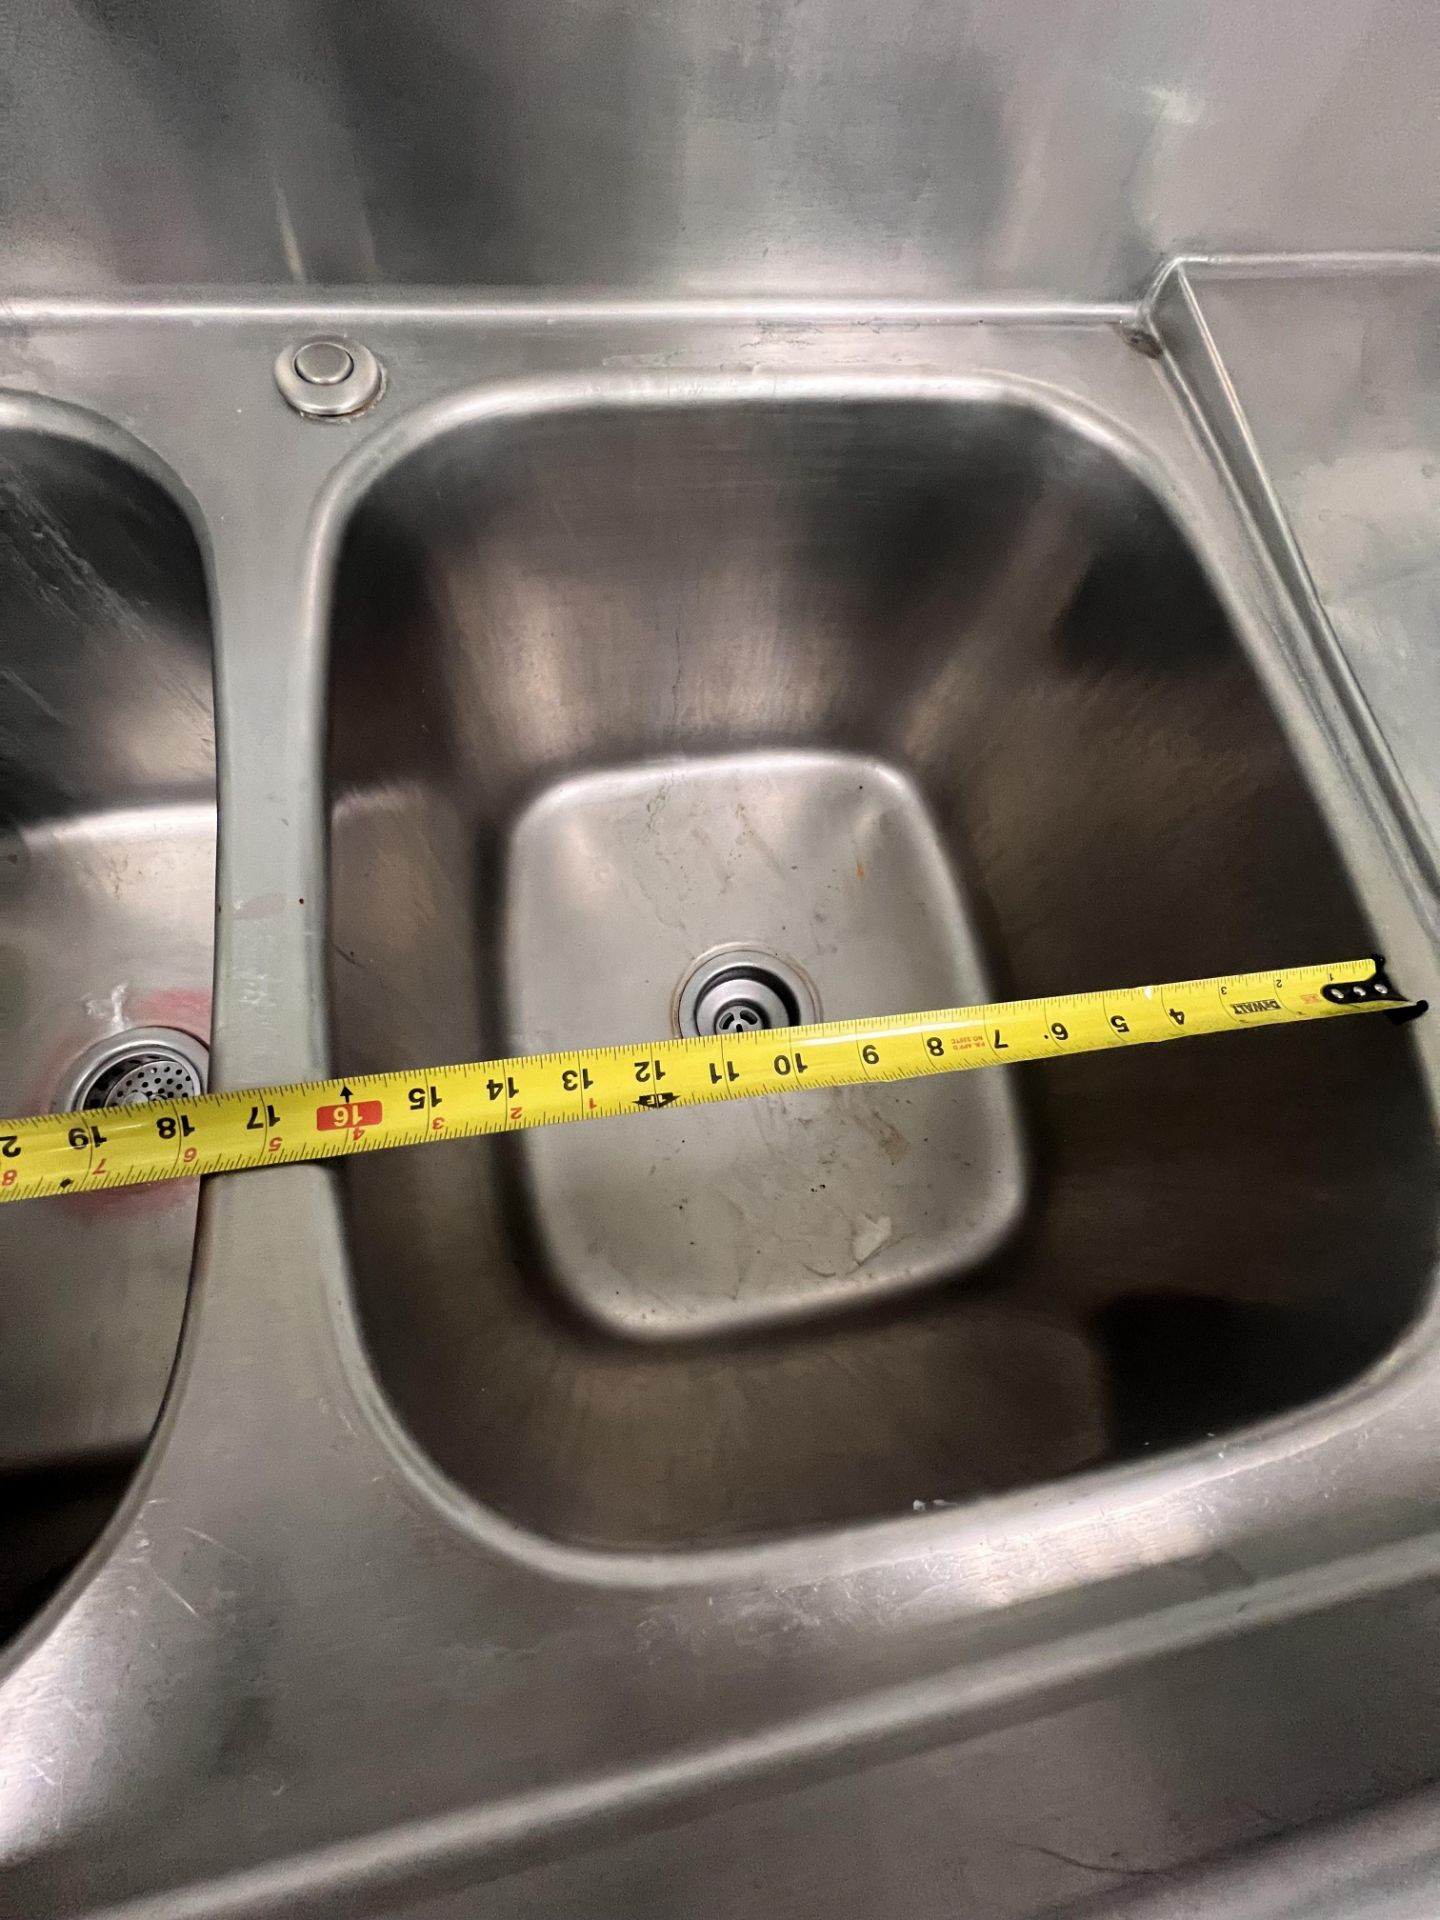 EAGLE GROUP 3-BOWL S/S SINK WITH GARBAGE DISPOSAL, APPROX. 100 IN L X 24 IN W X 39 IN H, - Image 9 of 11